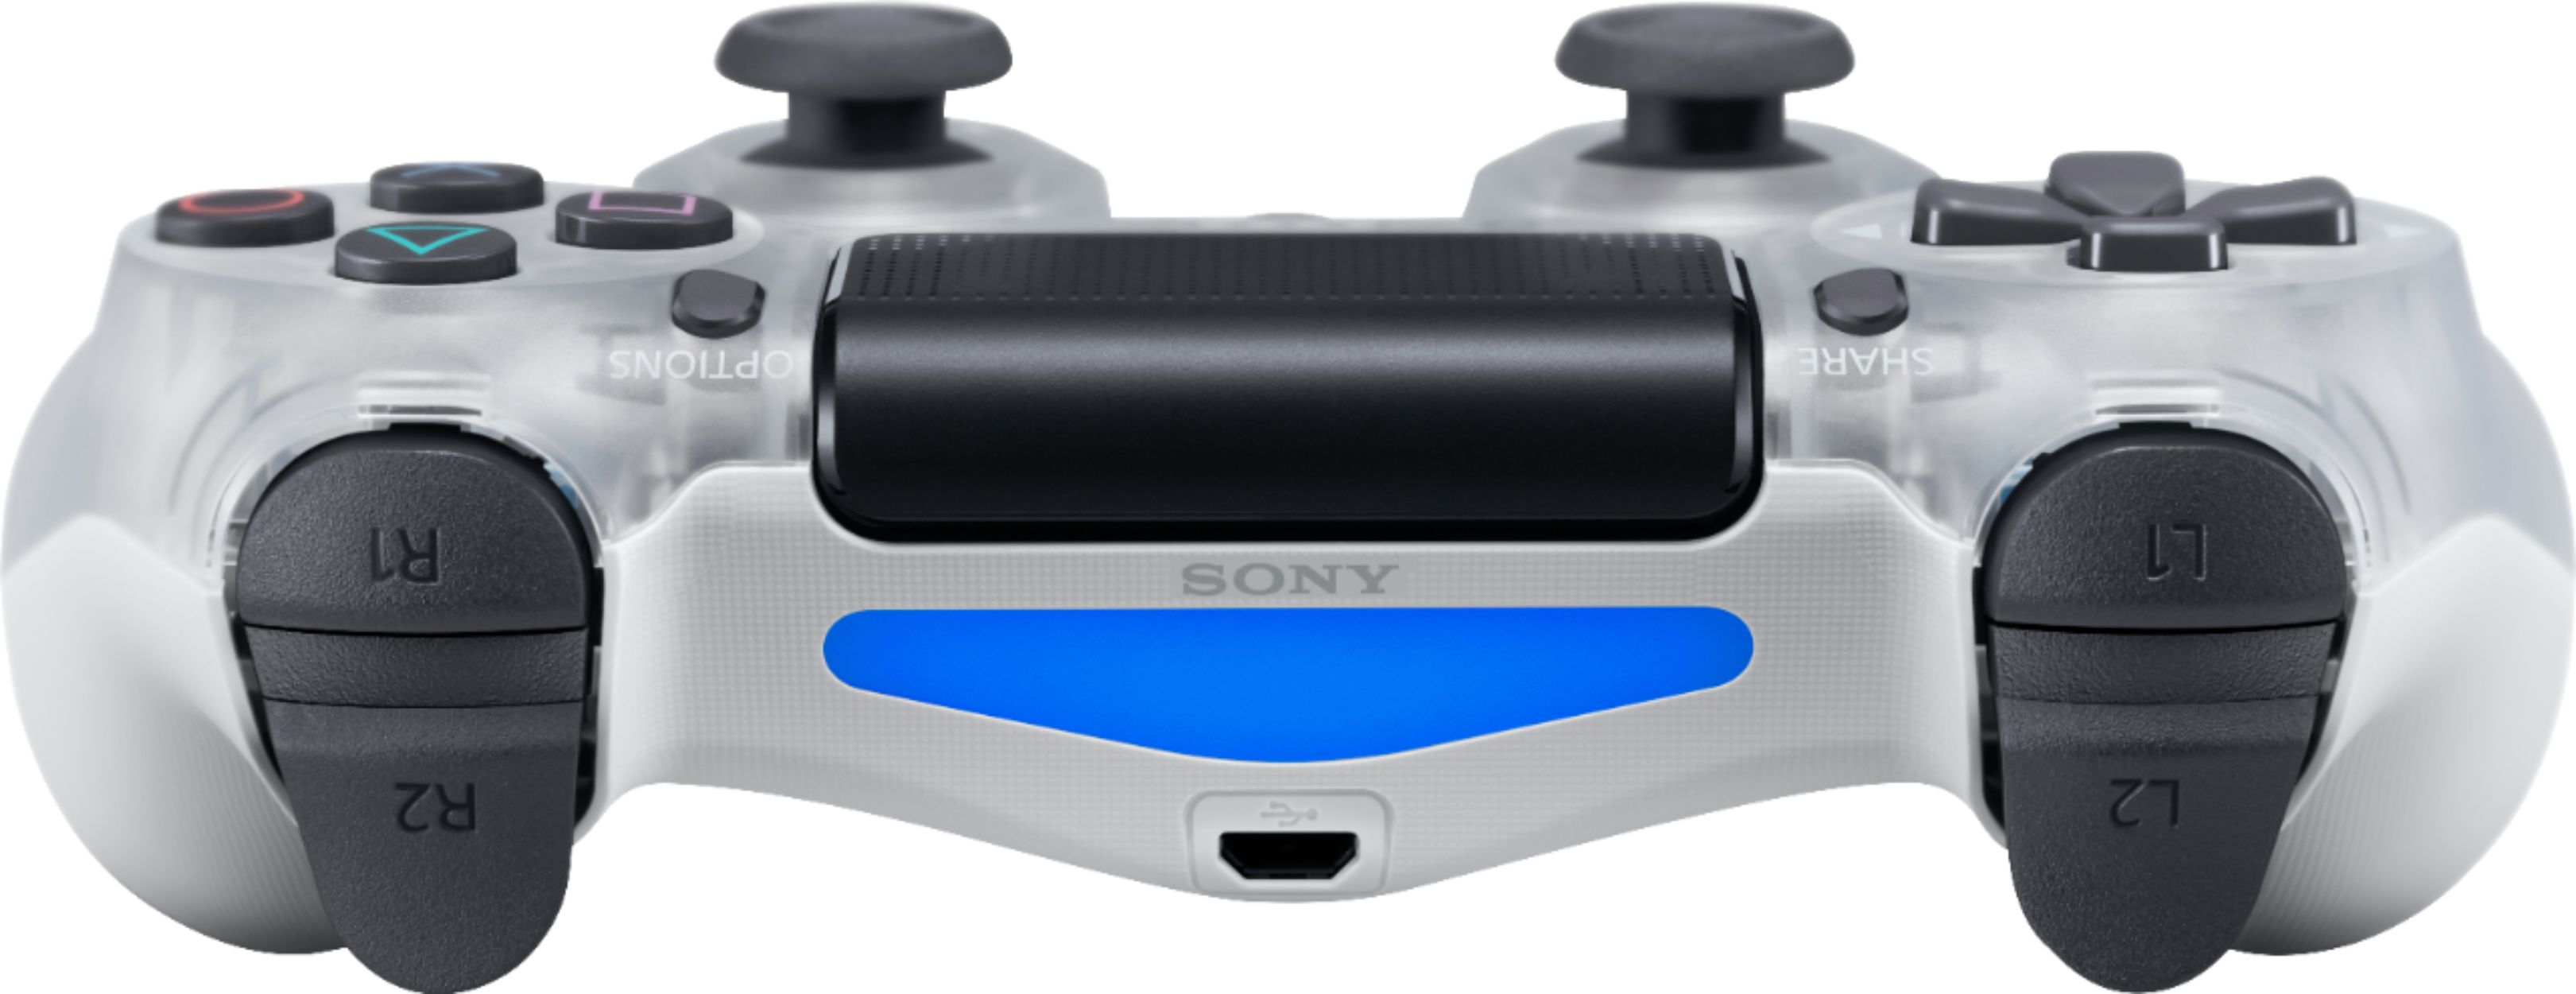 Back View: Sony - Geek Squad Certified Refurbished DualShock 4 Wireless Controller for PlayStation 4 - Crystal